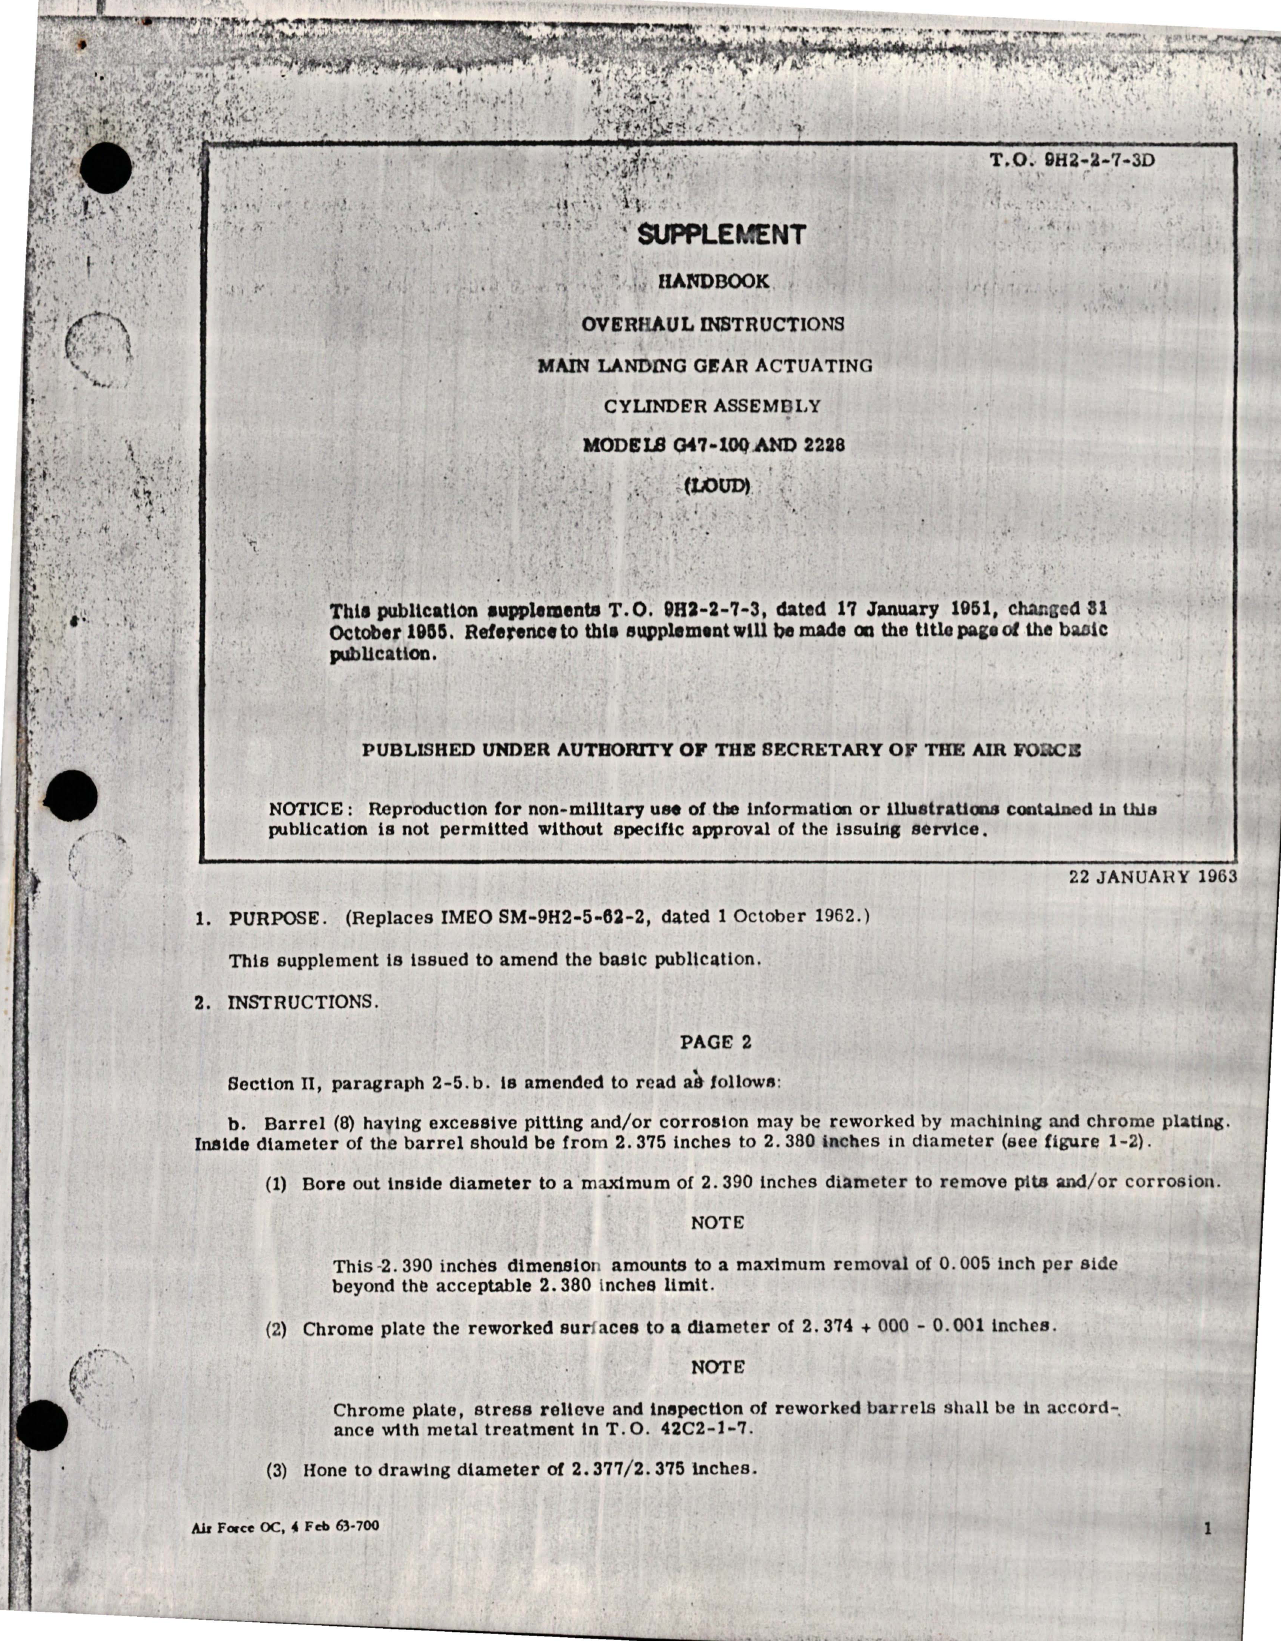 Sample page 1 from AirCorps Library document: Supplement to Overhaul Instructions for Main Landing Gear Actuating Cylinder Assembly - Models G47-100 and 2228 